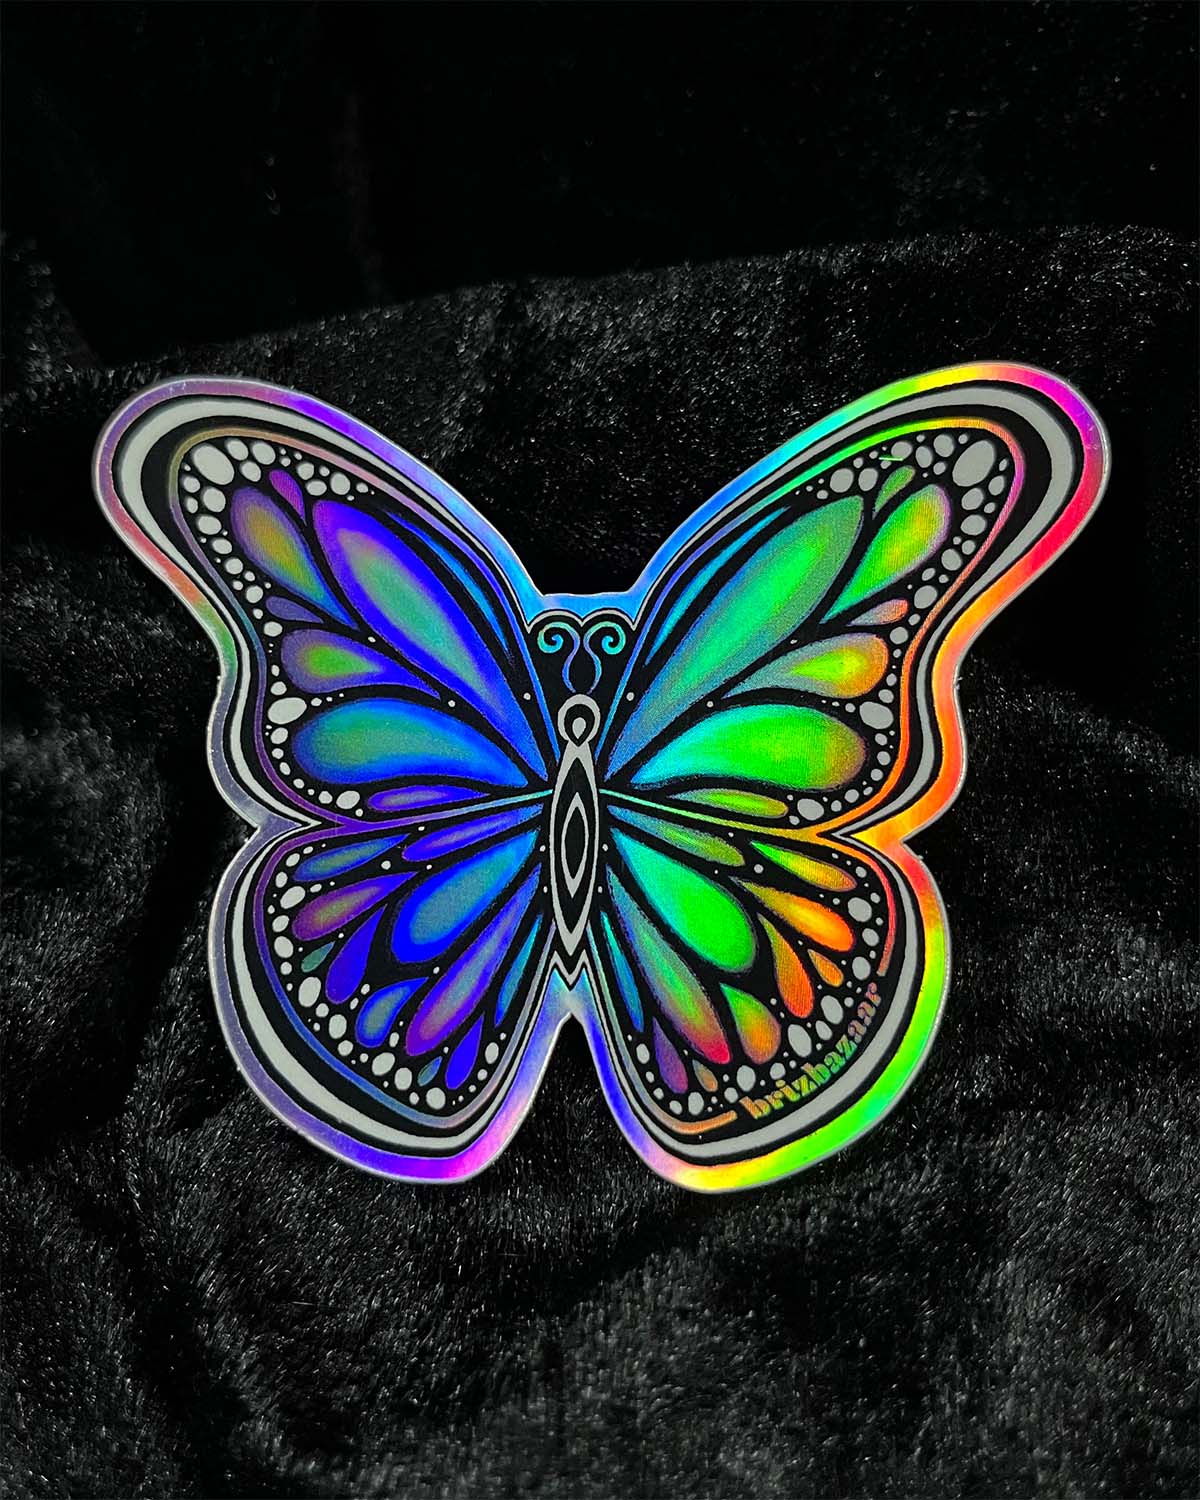 Holographic sticker of Butterfly Vibez